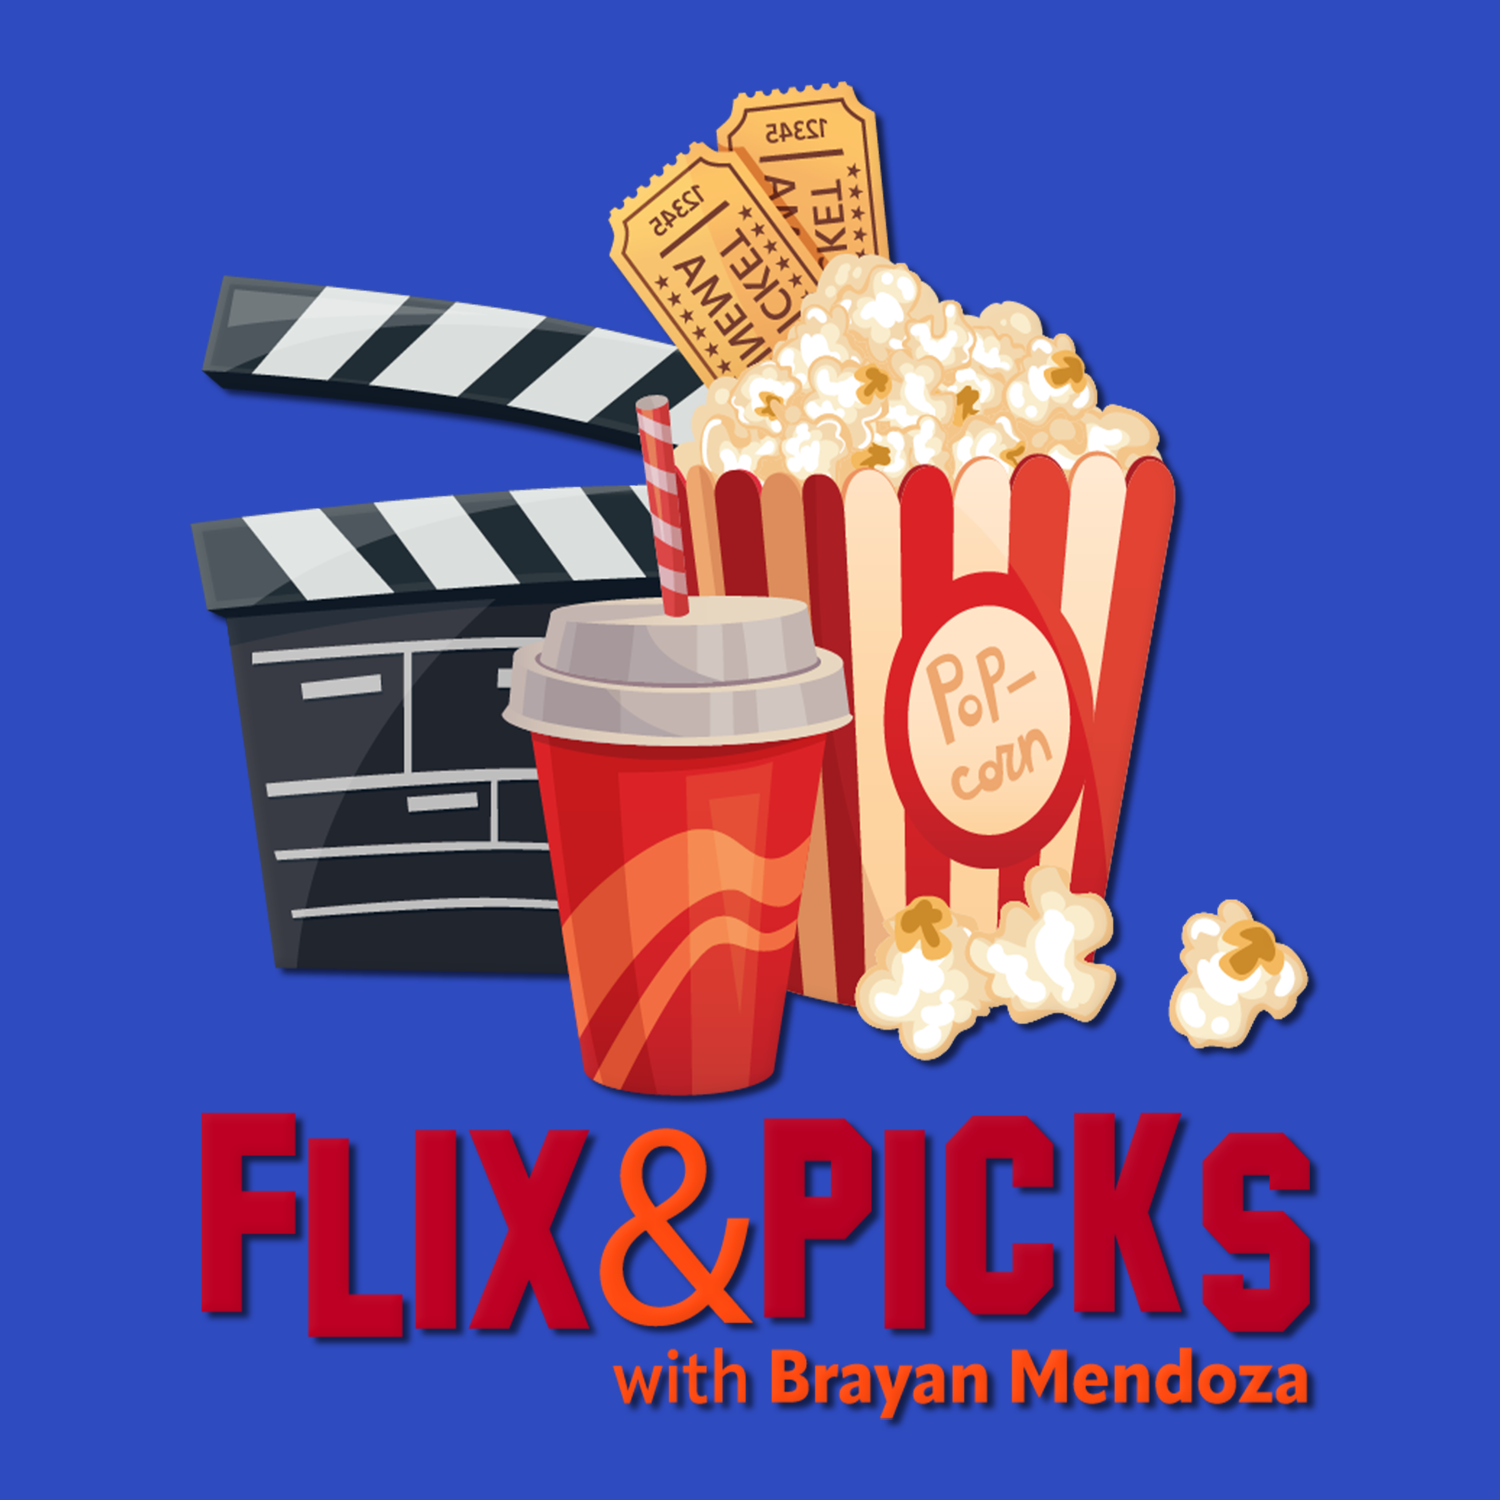 Artwork for podcast Flix & Picks with Brayan Mendoza